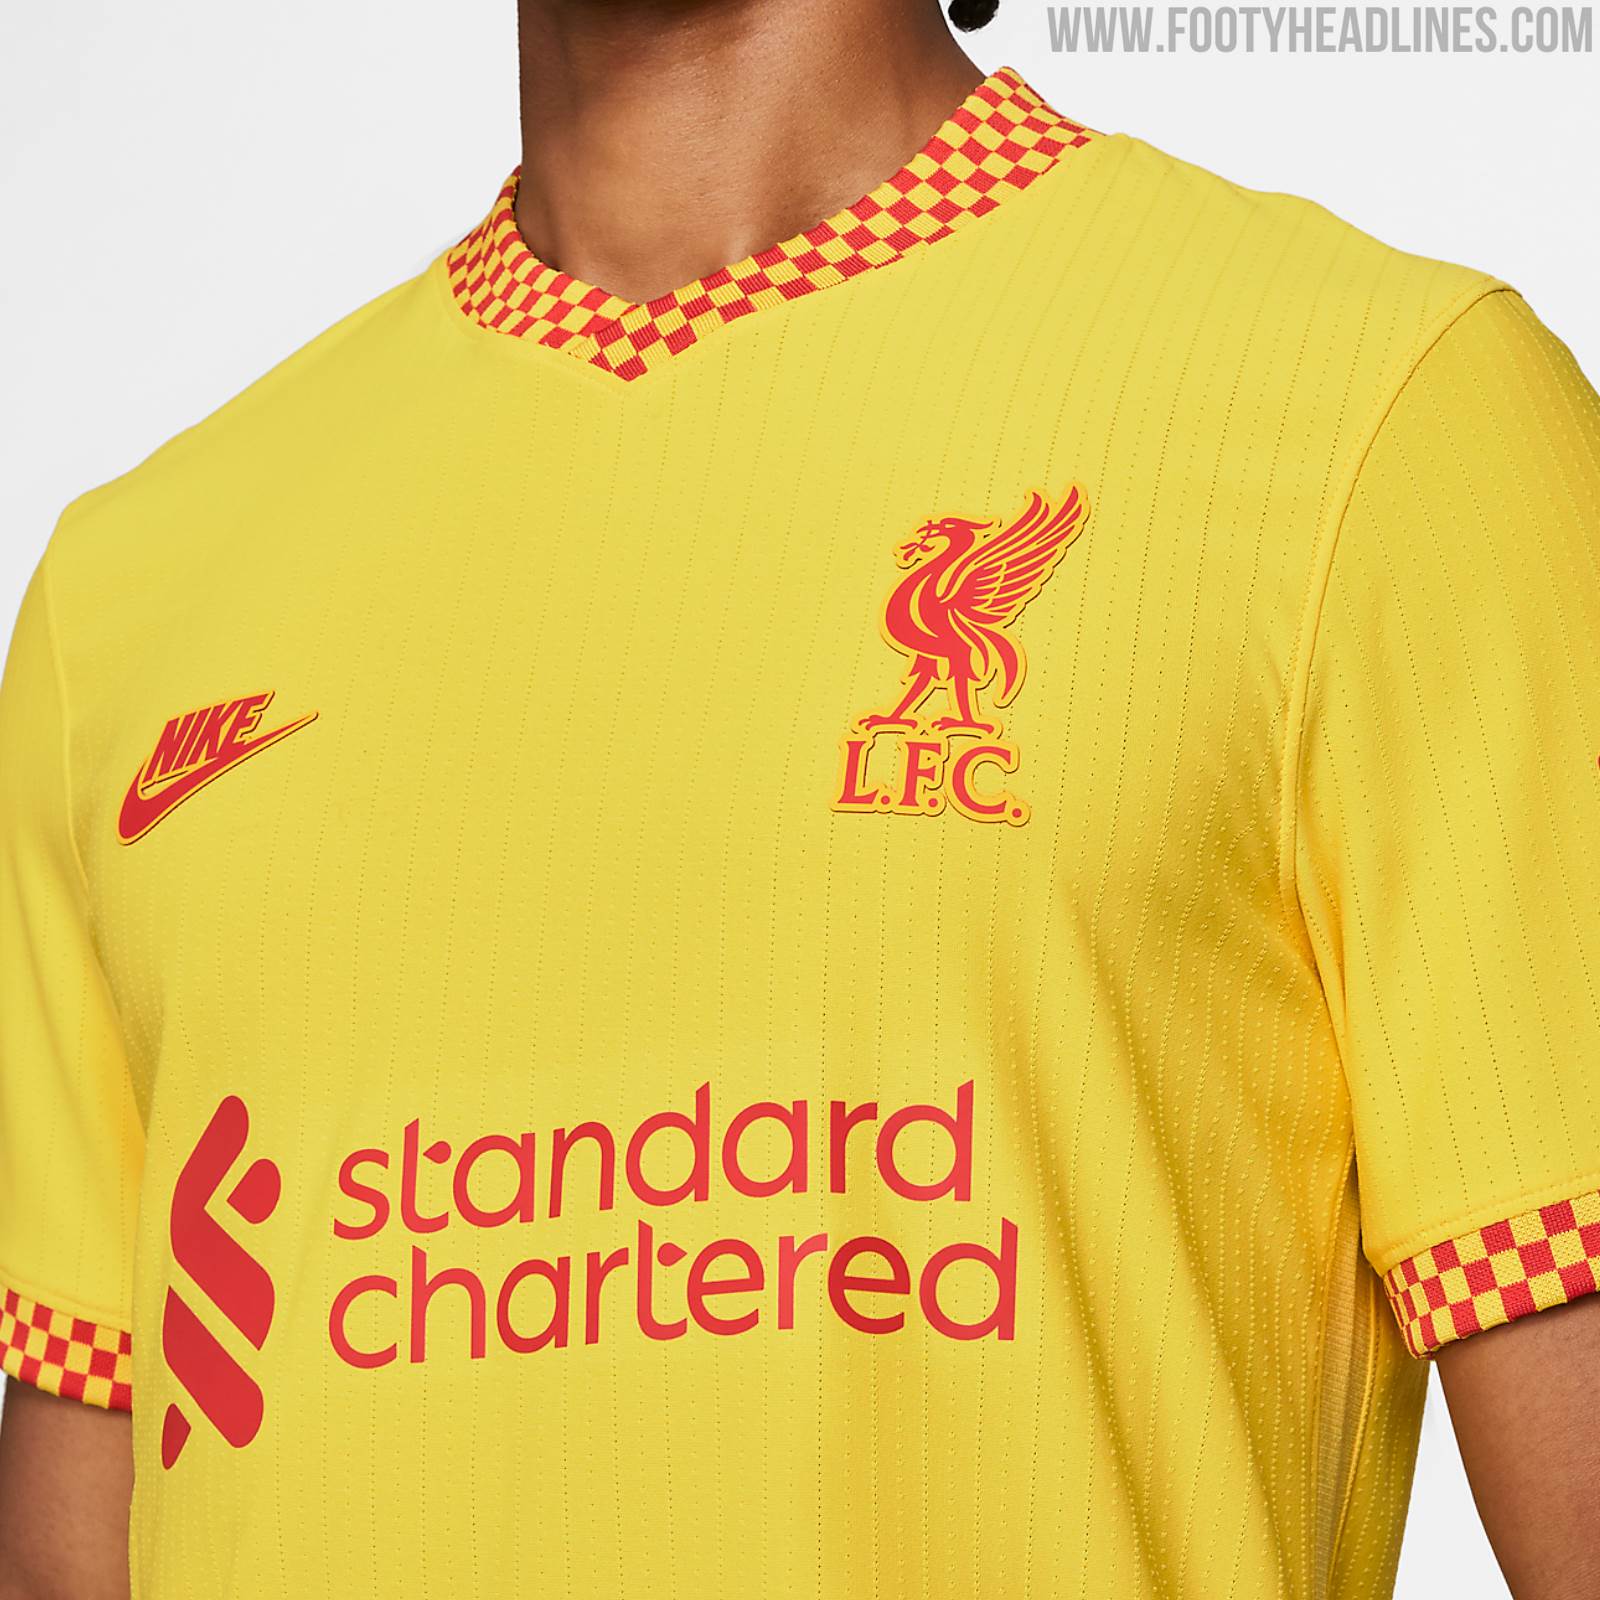 Nike Football Liverpool F.C. Champions League jersey in yellow